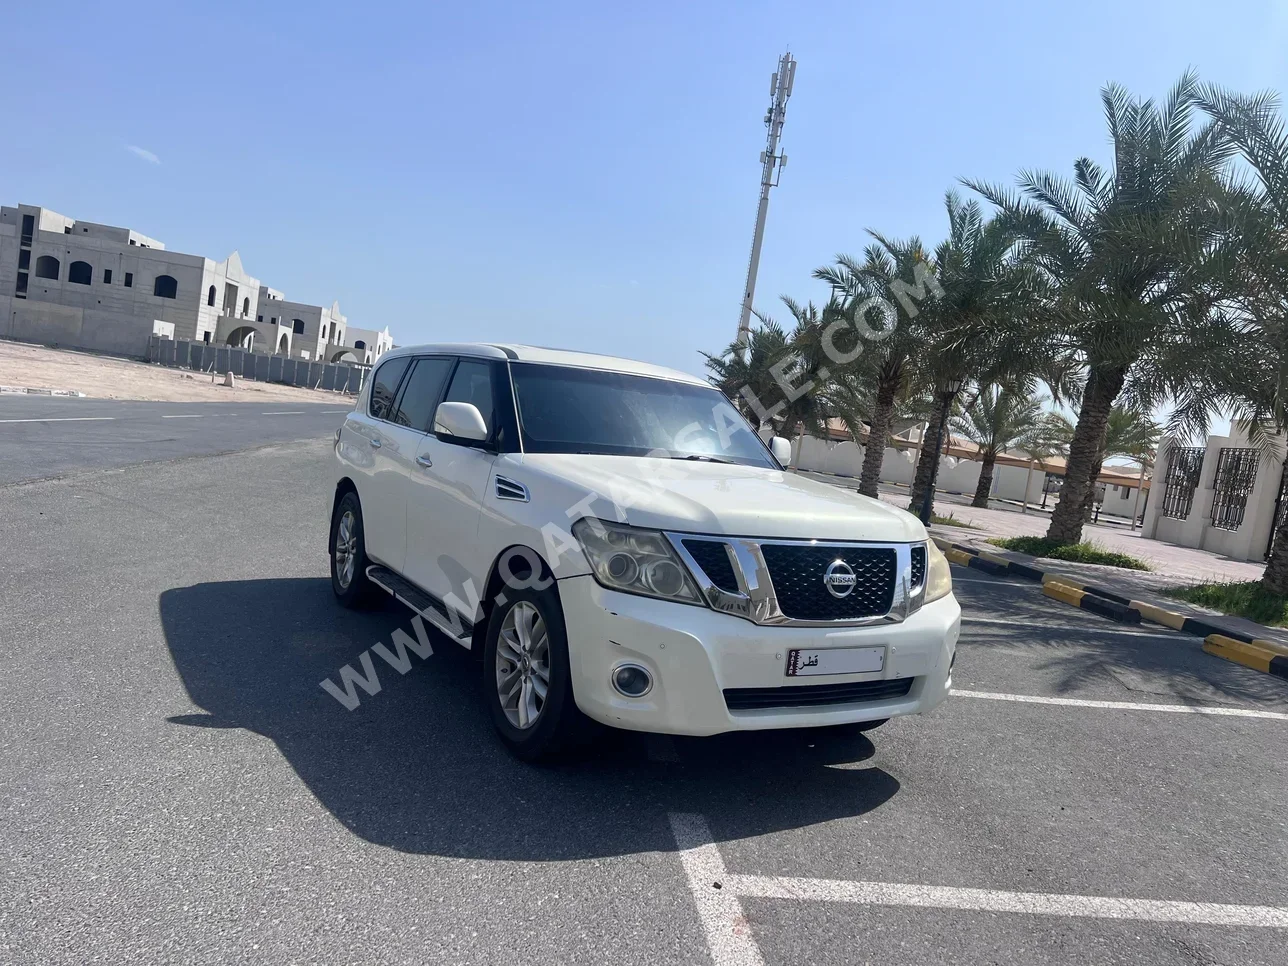 Nissan  Patrol  LE  2012  Automatic  254,000 Km  8 Cylinder  Four Wheel Drive (4WD)  SUV  White